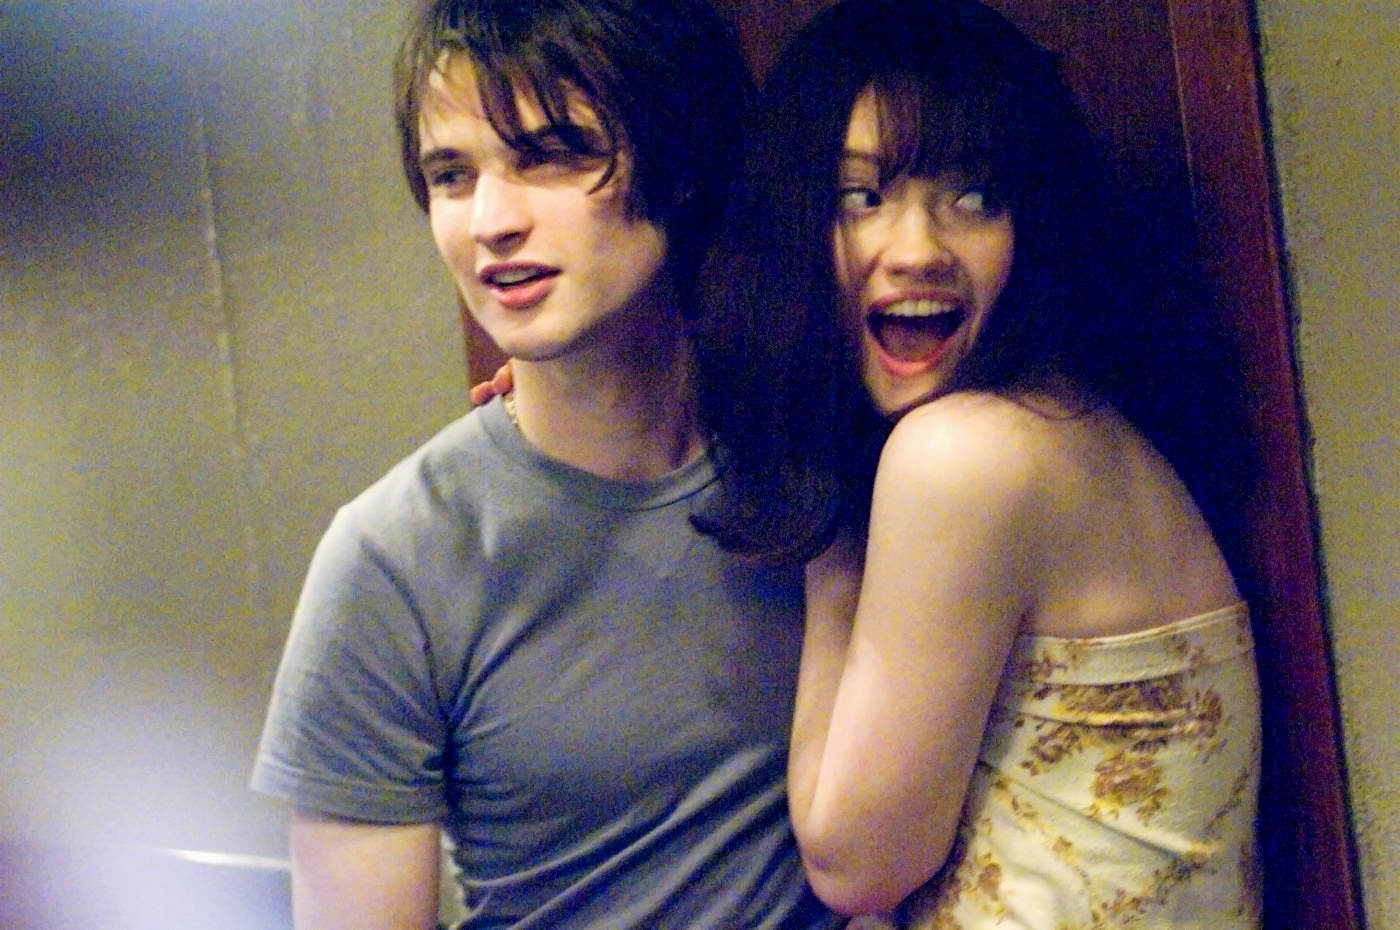 Tom Sturridge stars as Carl and Talulah Riley stars as Marianne in Focus Features' Pirate Radio (2009)